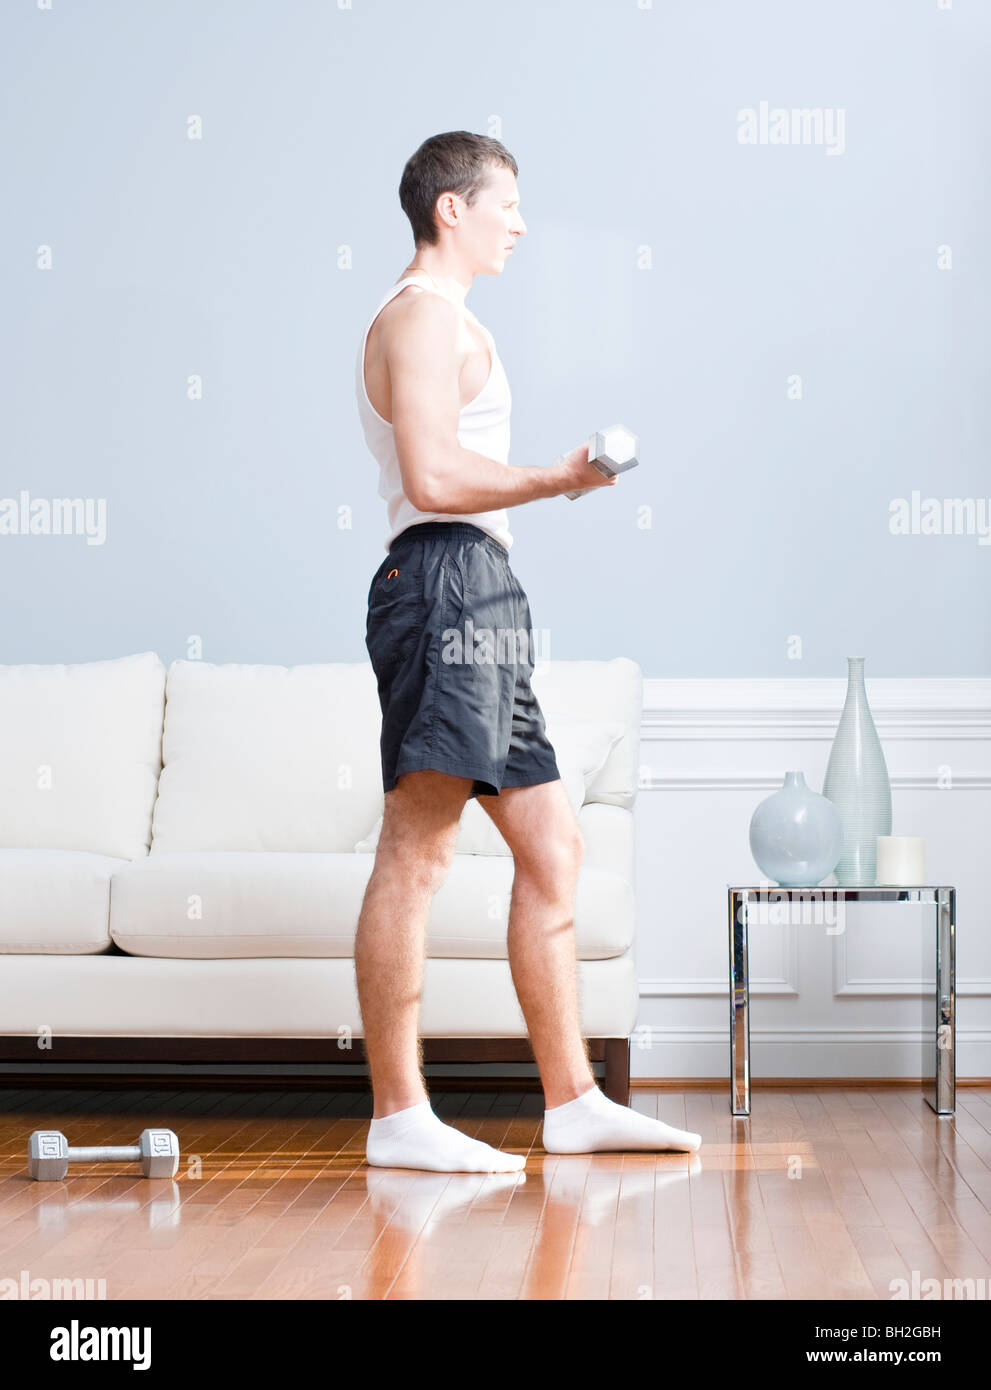 Man using arm weight in his living room as another lies on the floor next to him. Vertical format. Stock Photo